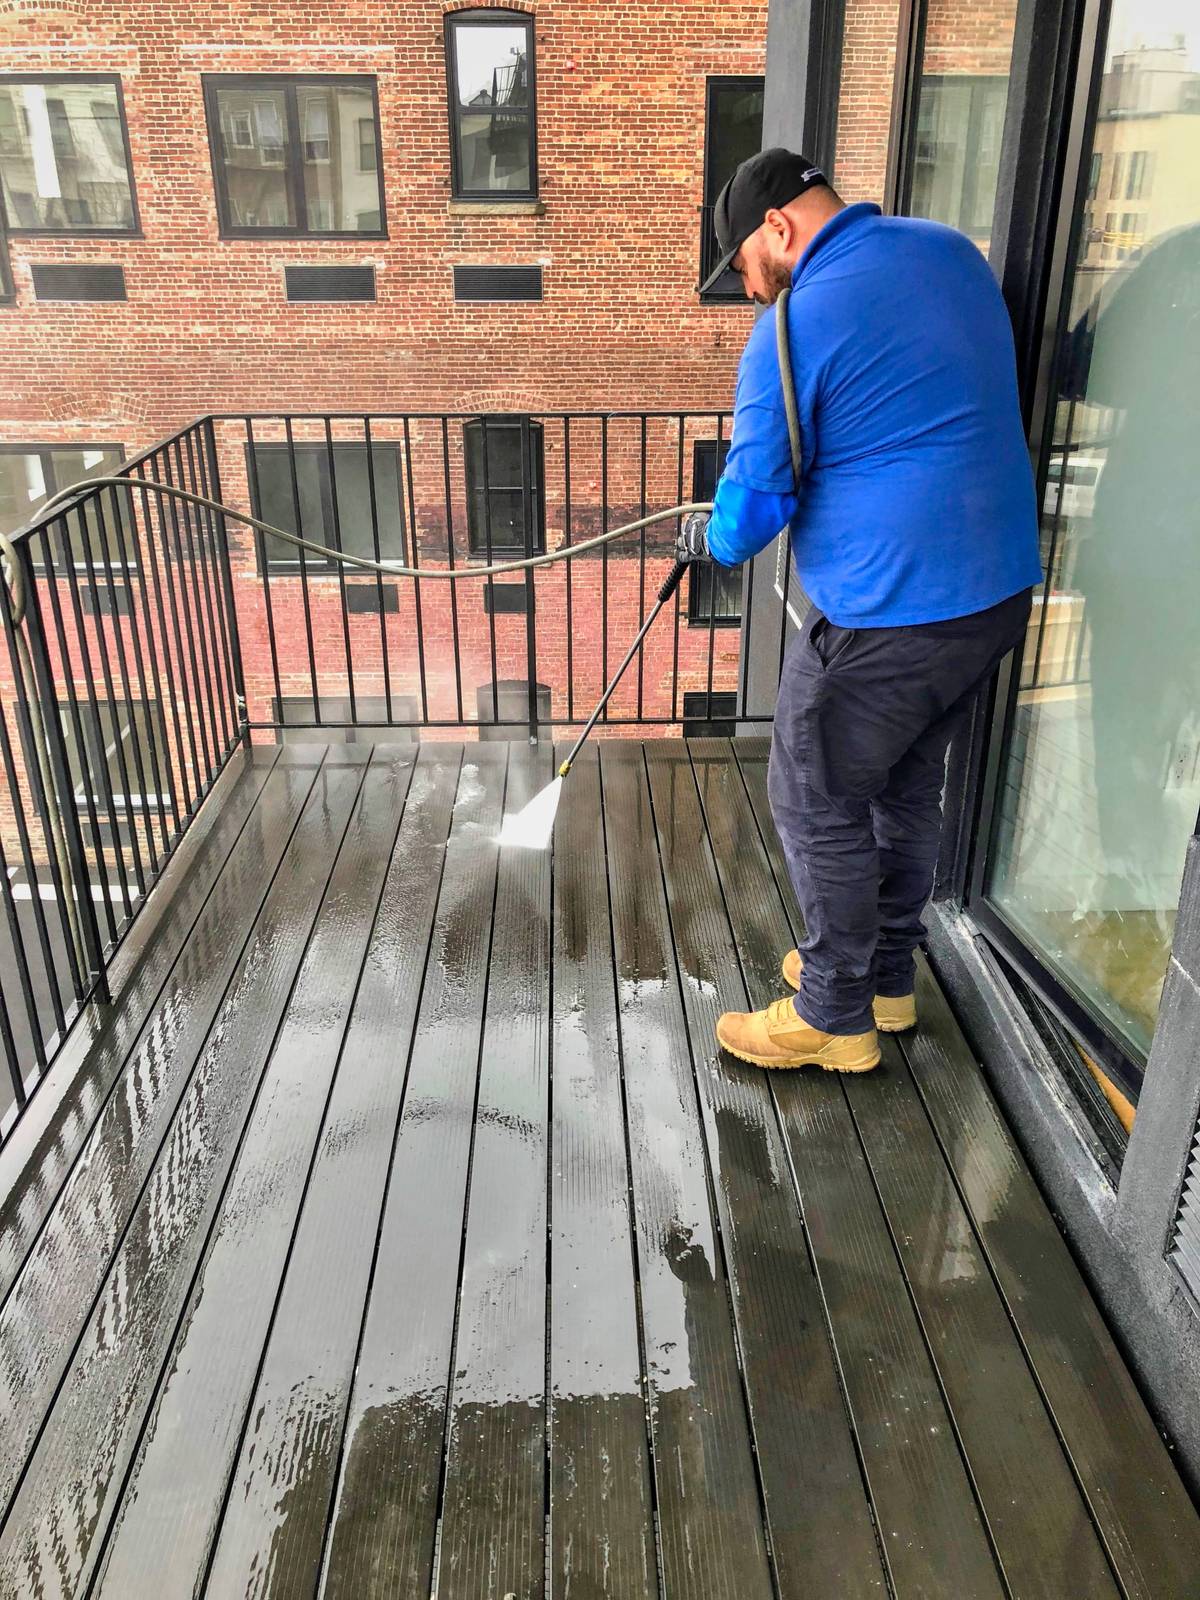 Pressure Washing bird droppings off deck or balcony